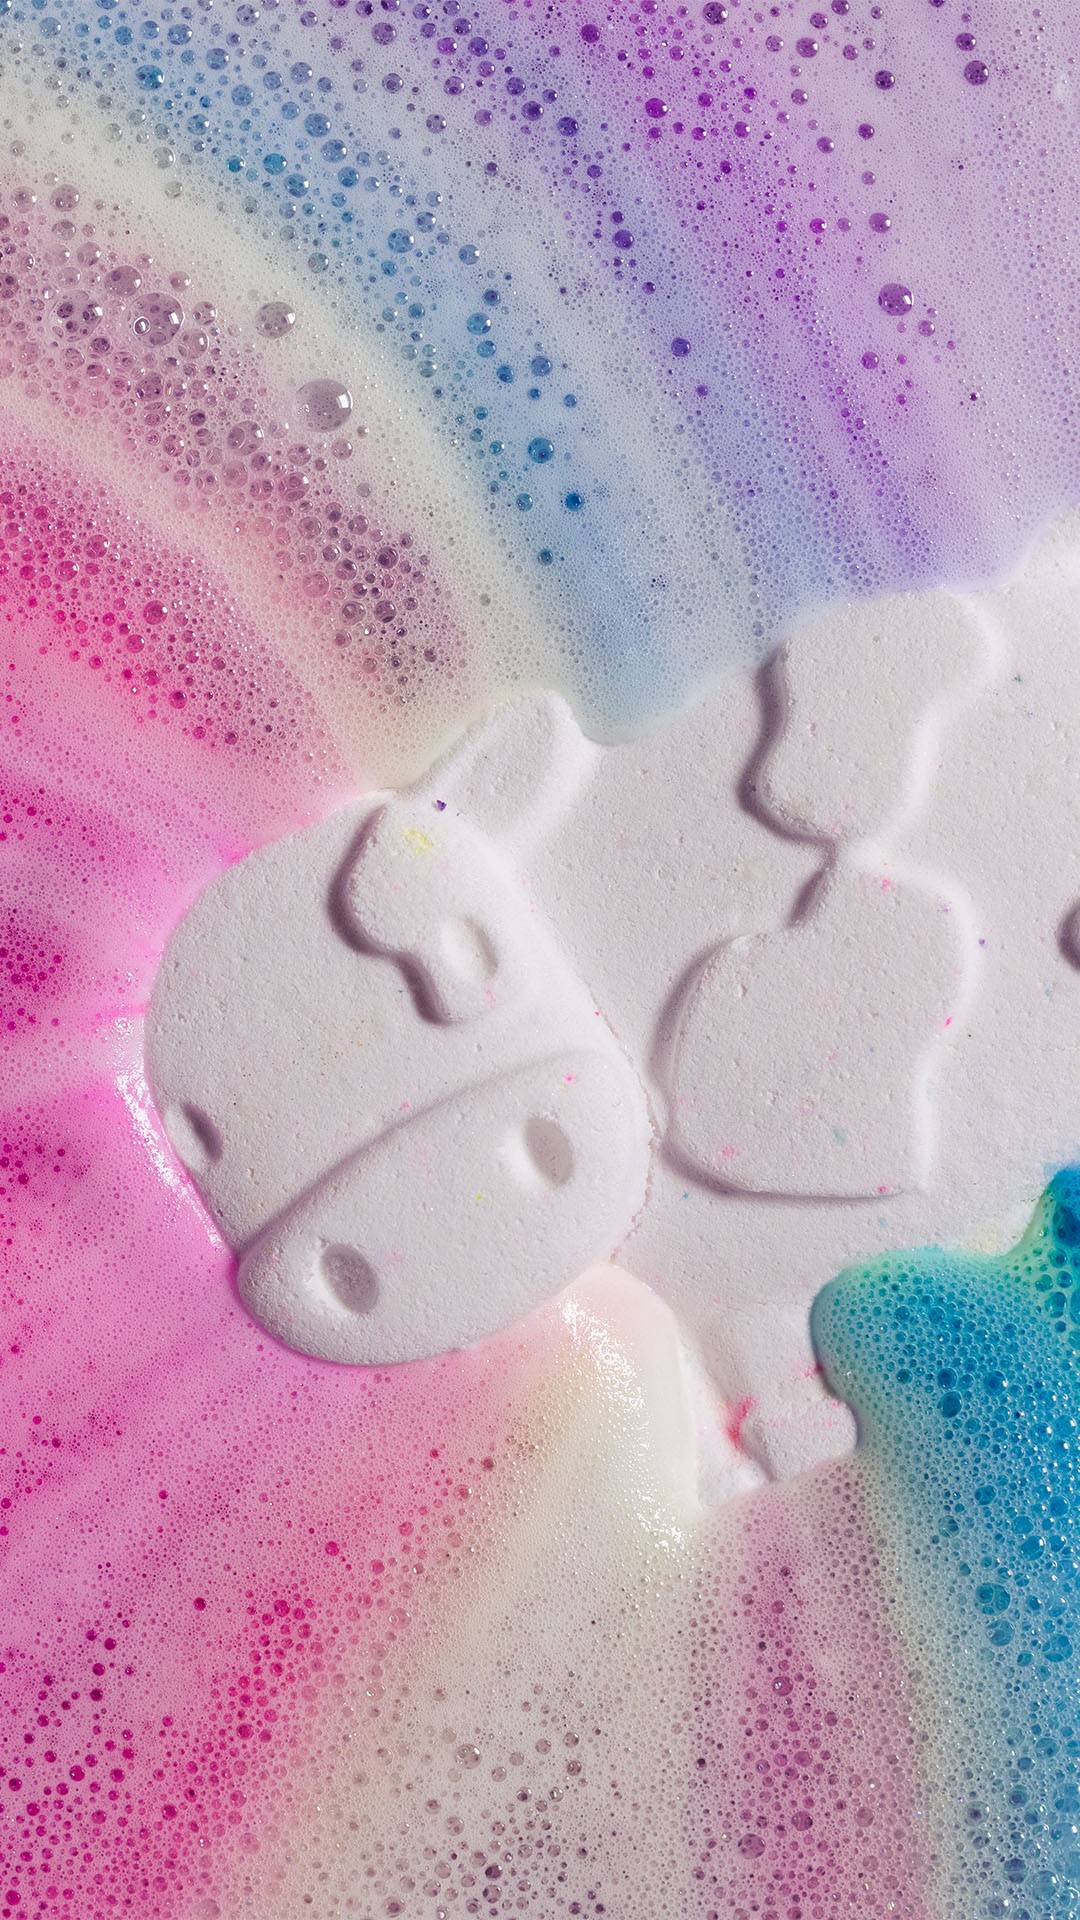 Rainbow bubbles and a little glimpse of a magic cow's face.